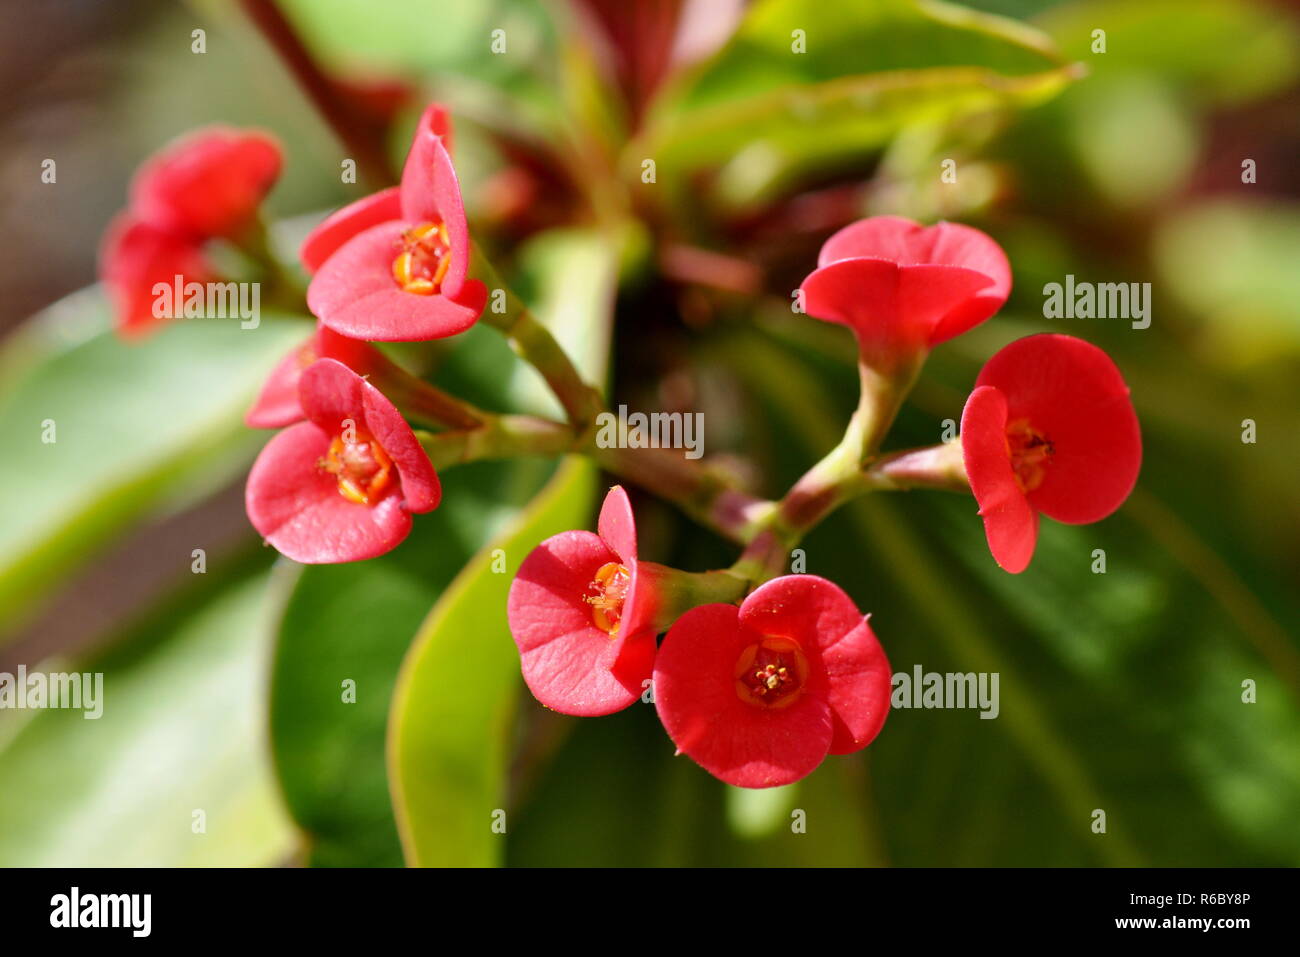 Closeup on the flowers of a Christ thorn plant Euphorbia milli Stock Photo